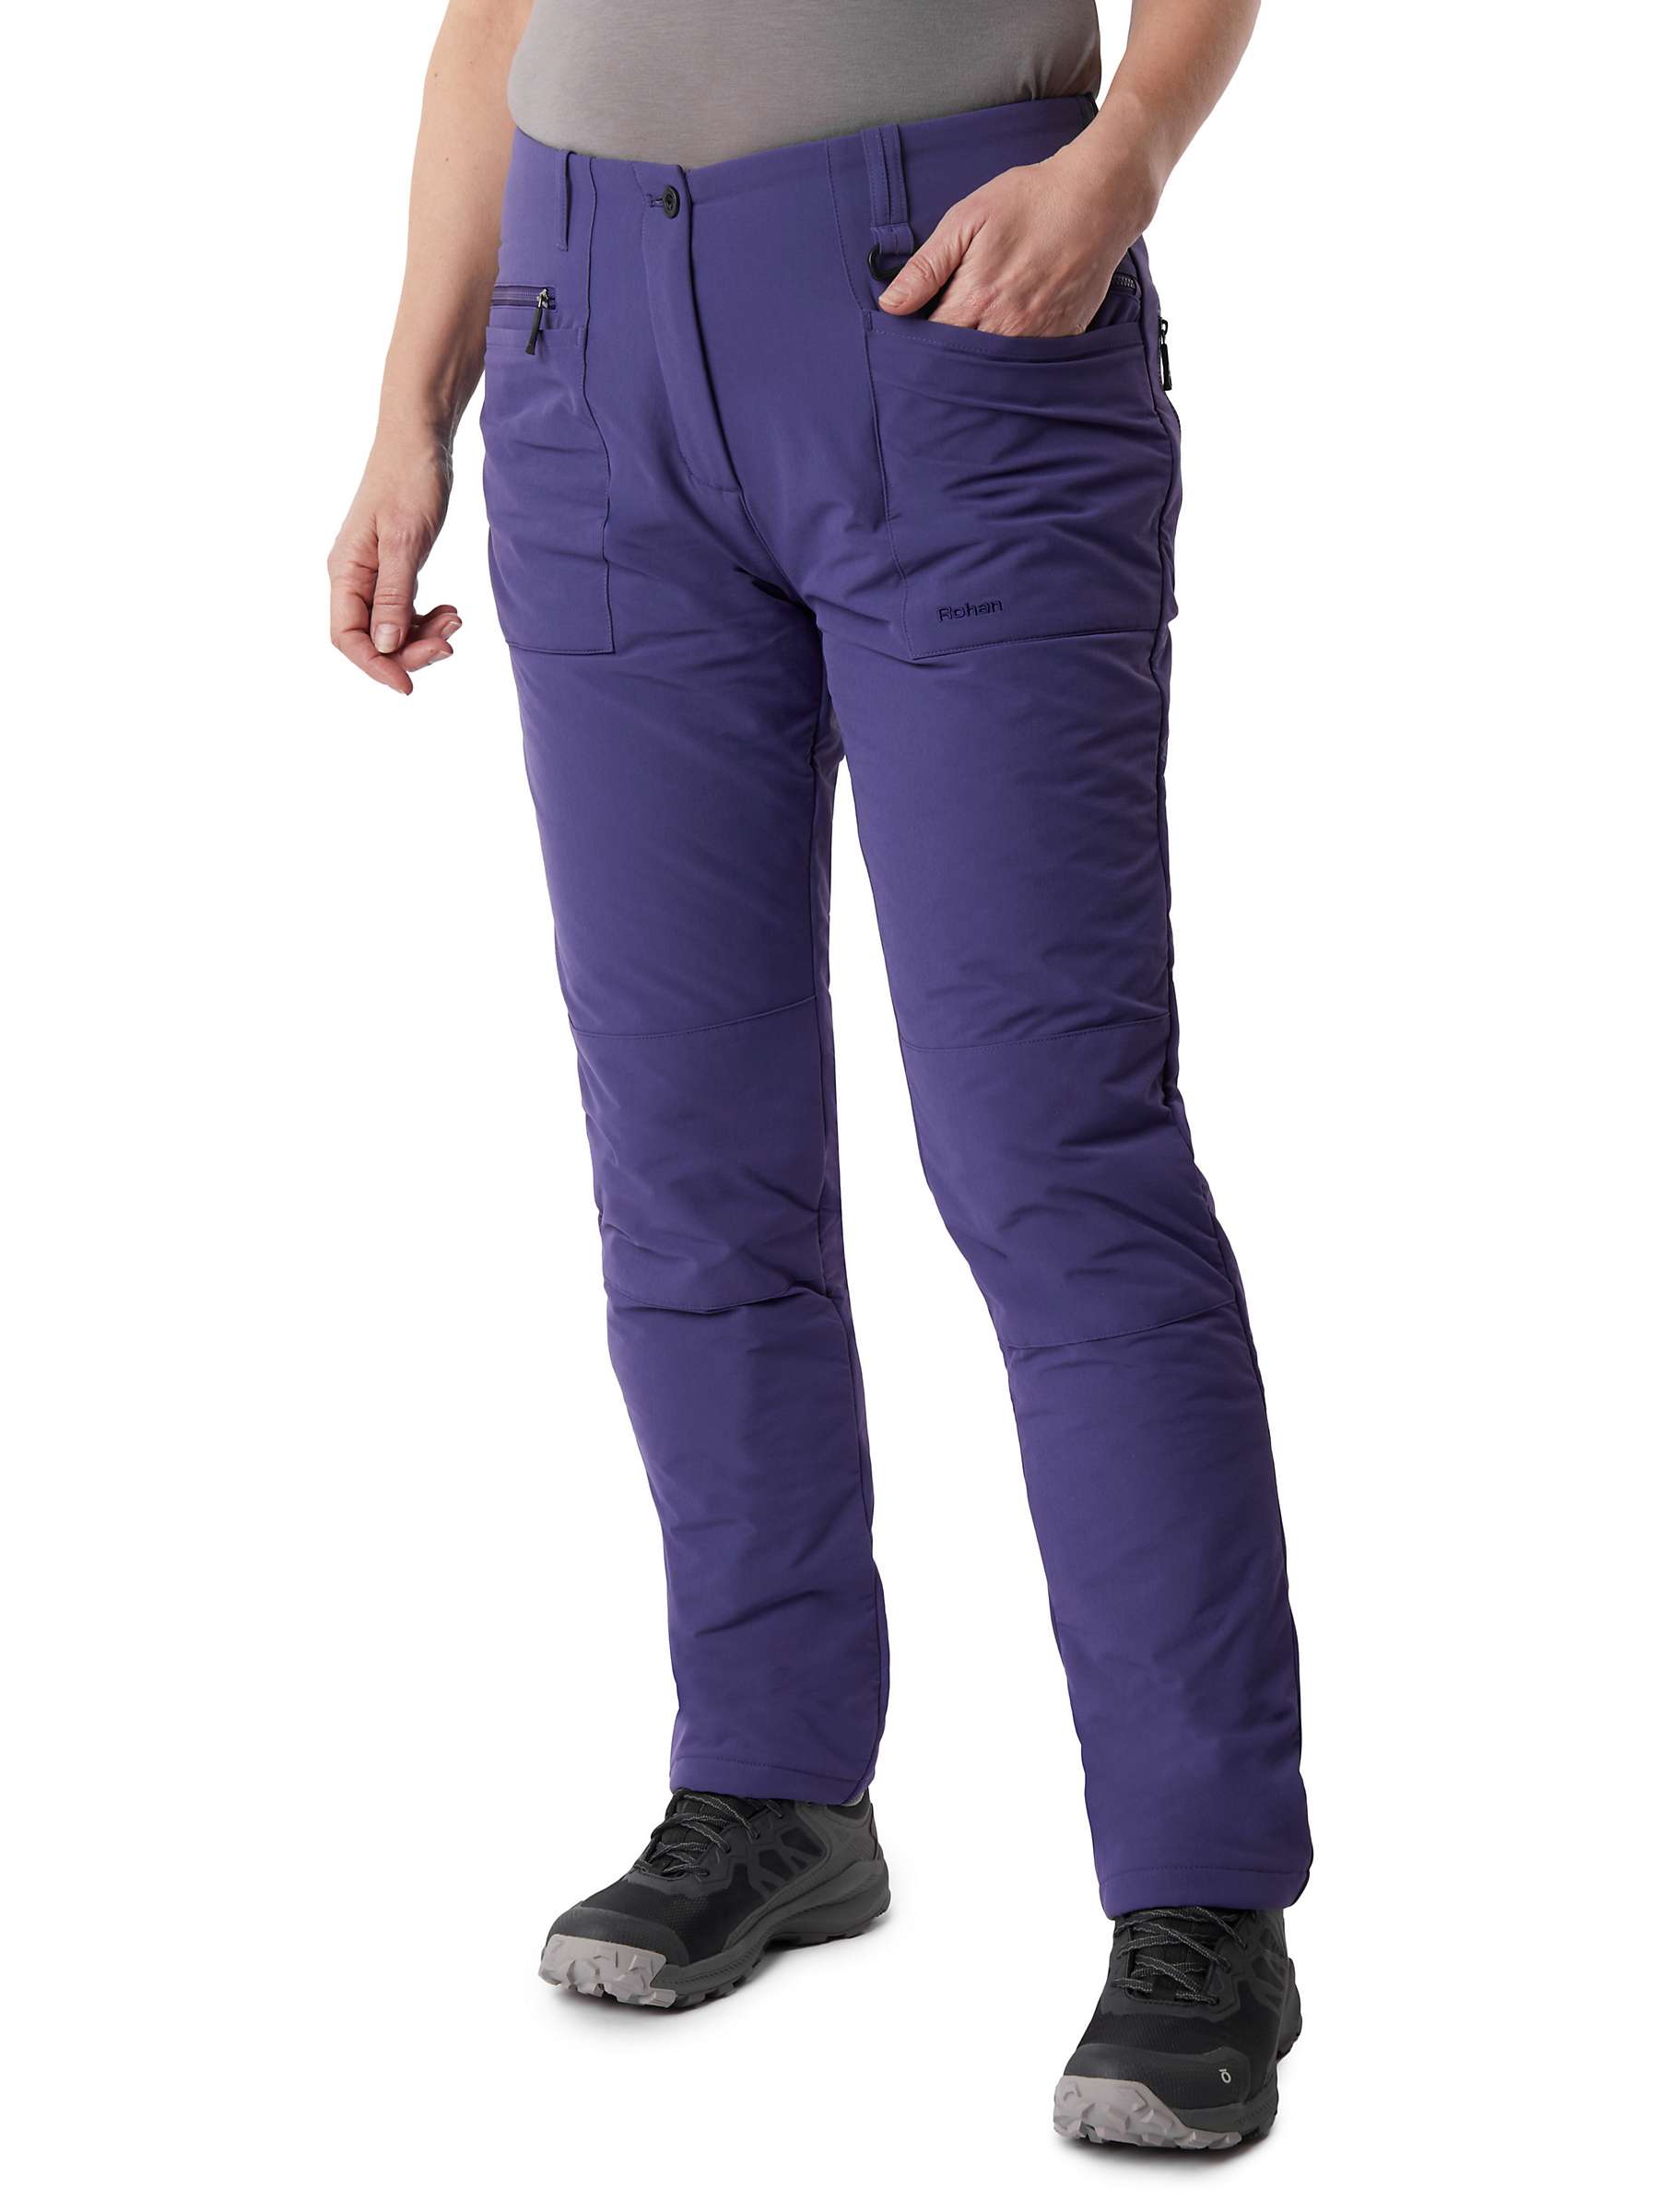 Buy Rohan Winter Stretch Bags Walking Trousers, Eclipse Blue Online at johnlewis.com